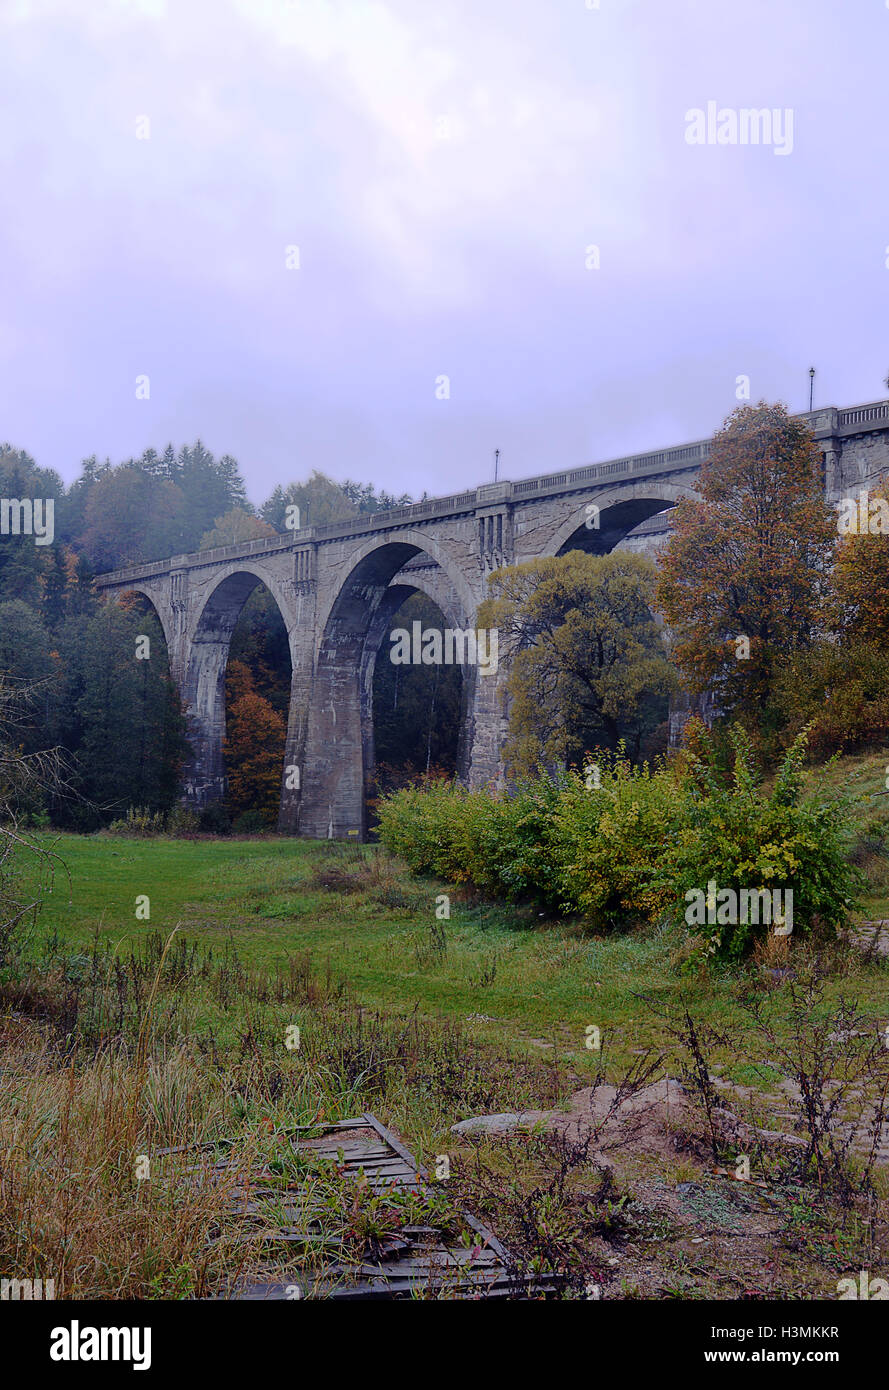 Two five-arched railway viaducts at Stanczyki, Poland, on a misty autumn day. Stock Photo